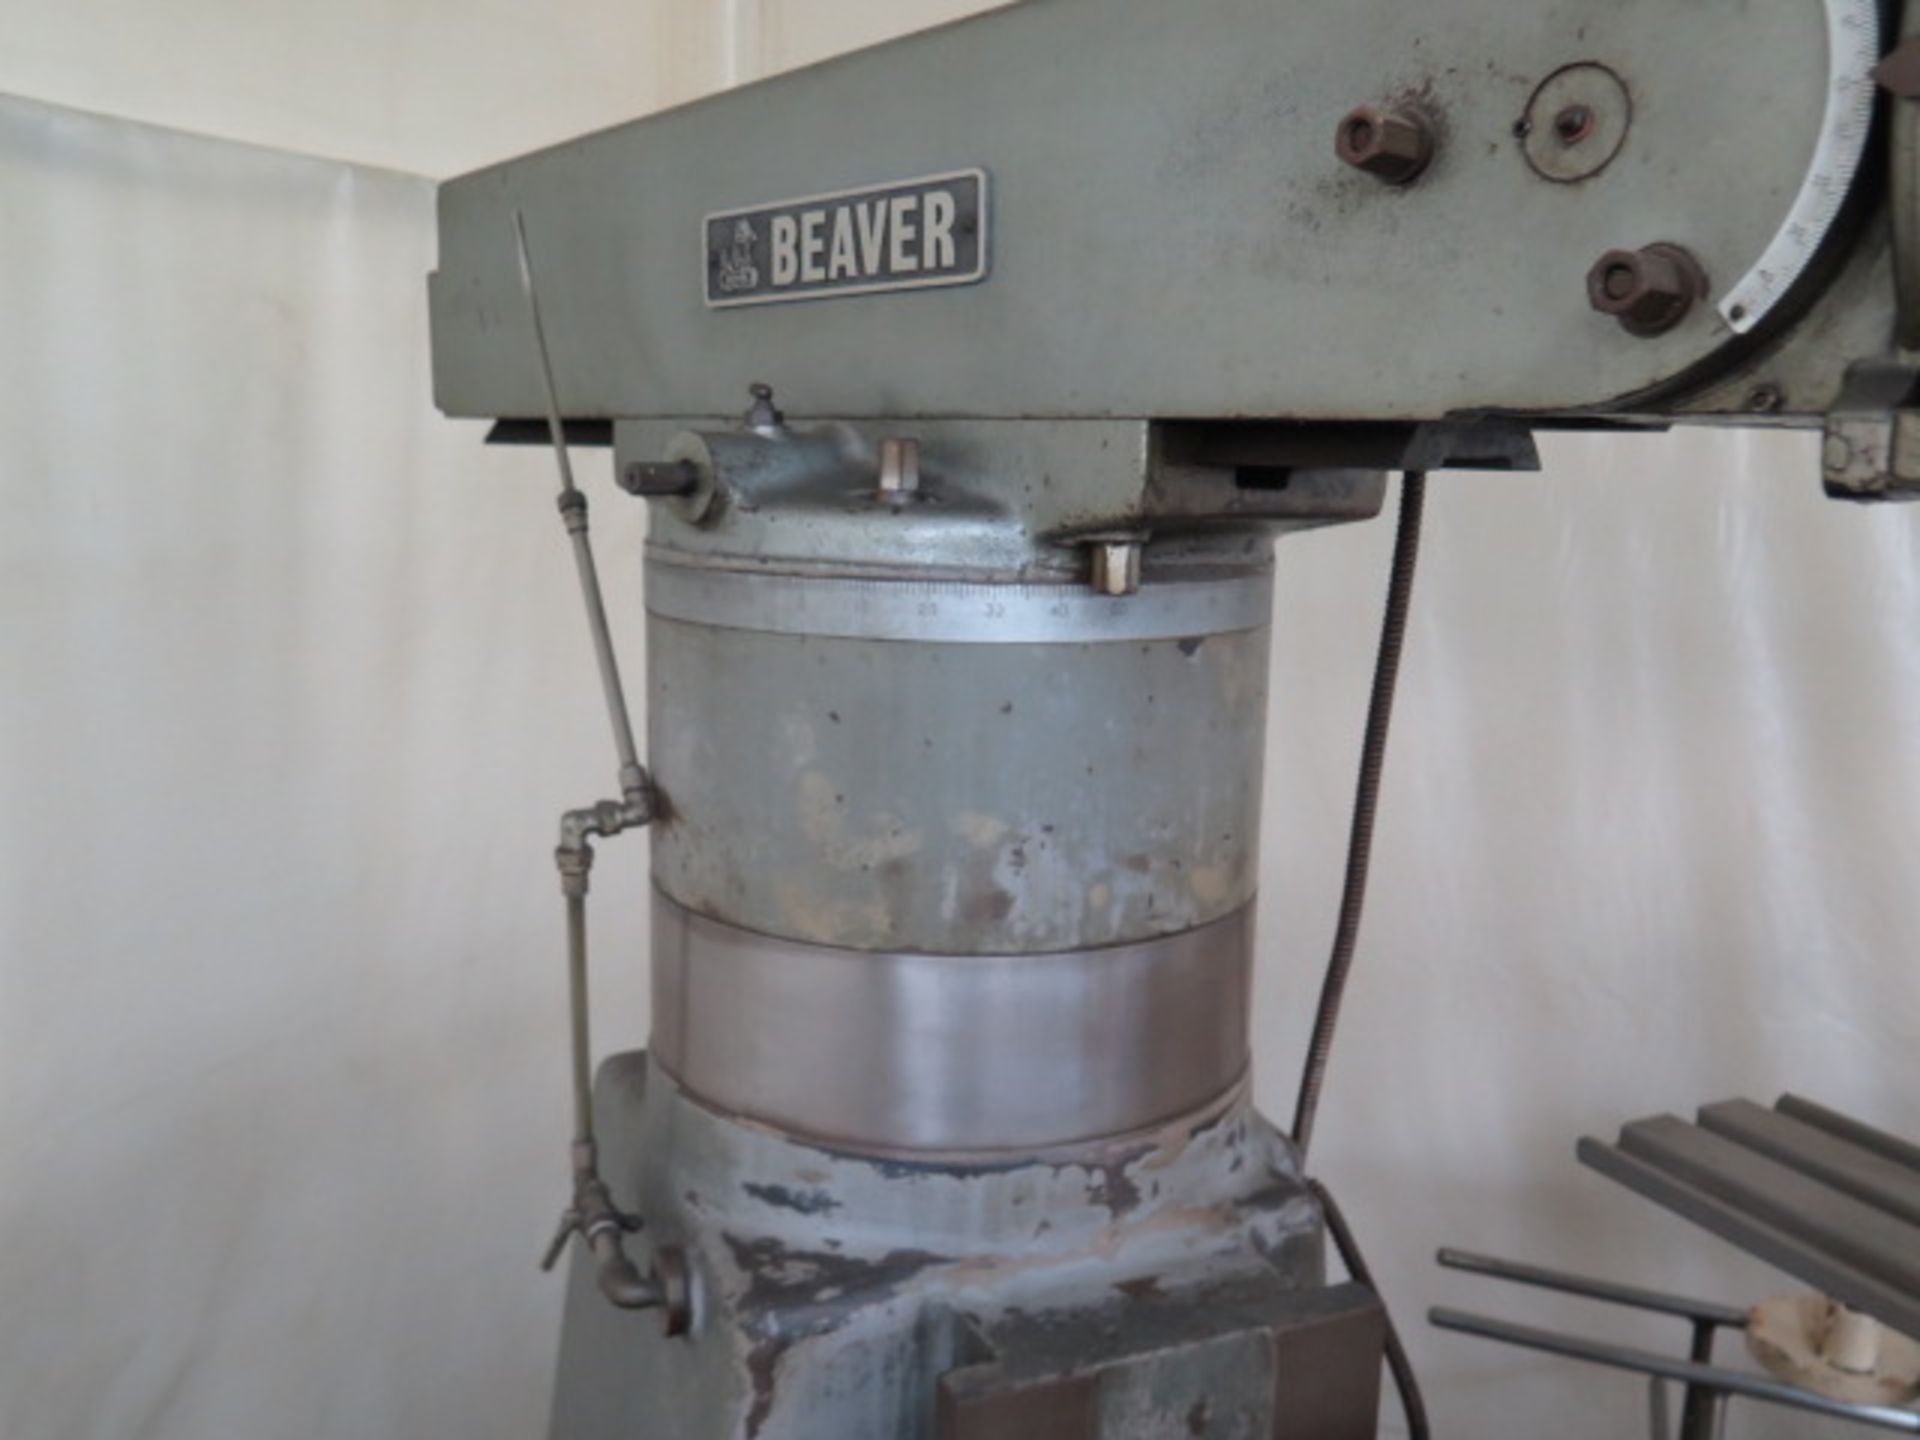 Beaver VBRP Vertical Mill s/n 4091/2 w/ 40-Taper Spindle, 10” Riser, Box Ways,Power Feed, SOLD AS IS - Image 6 of 11